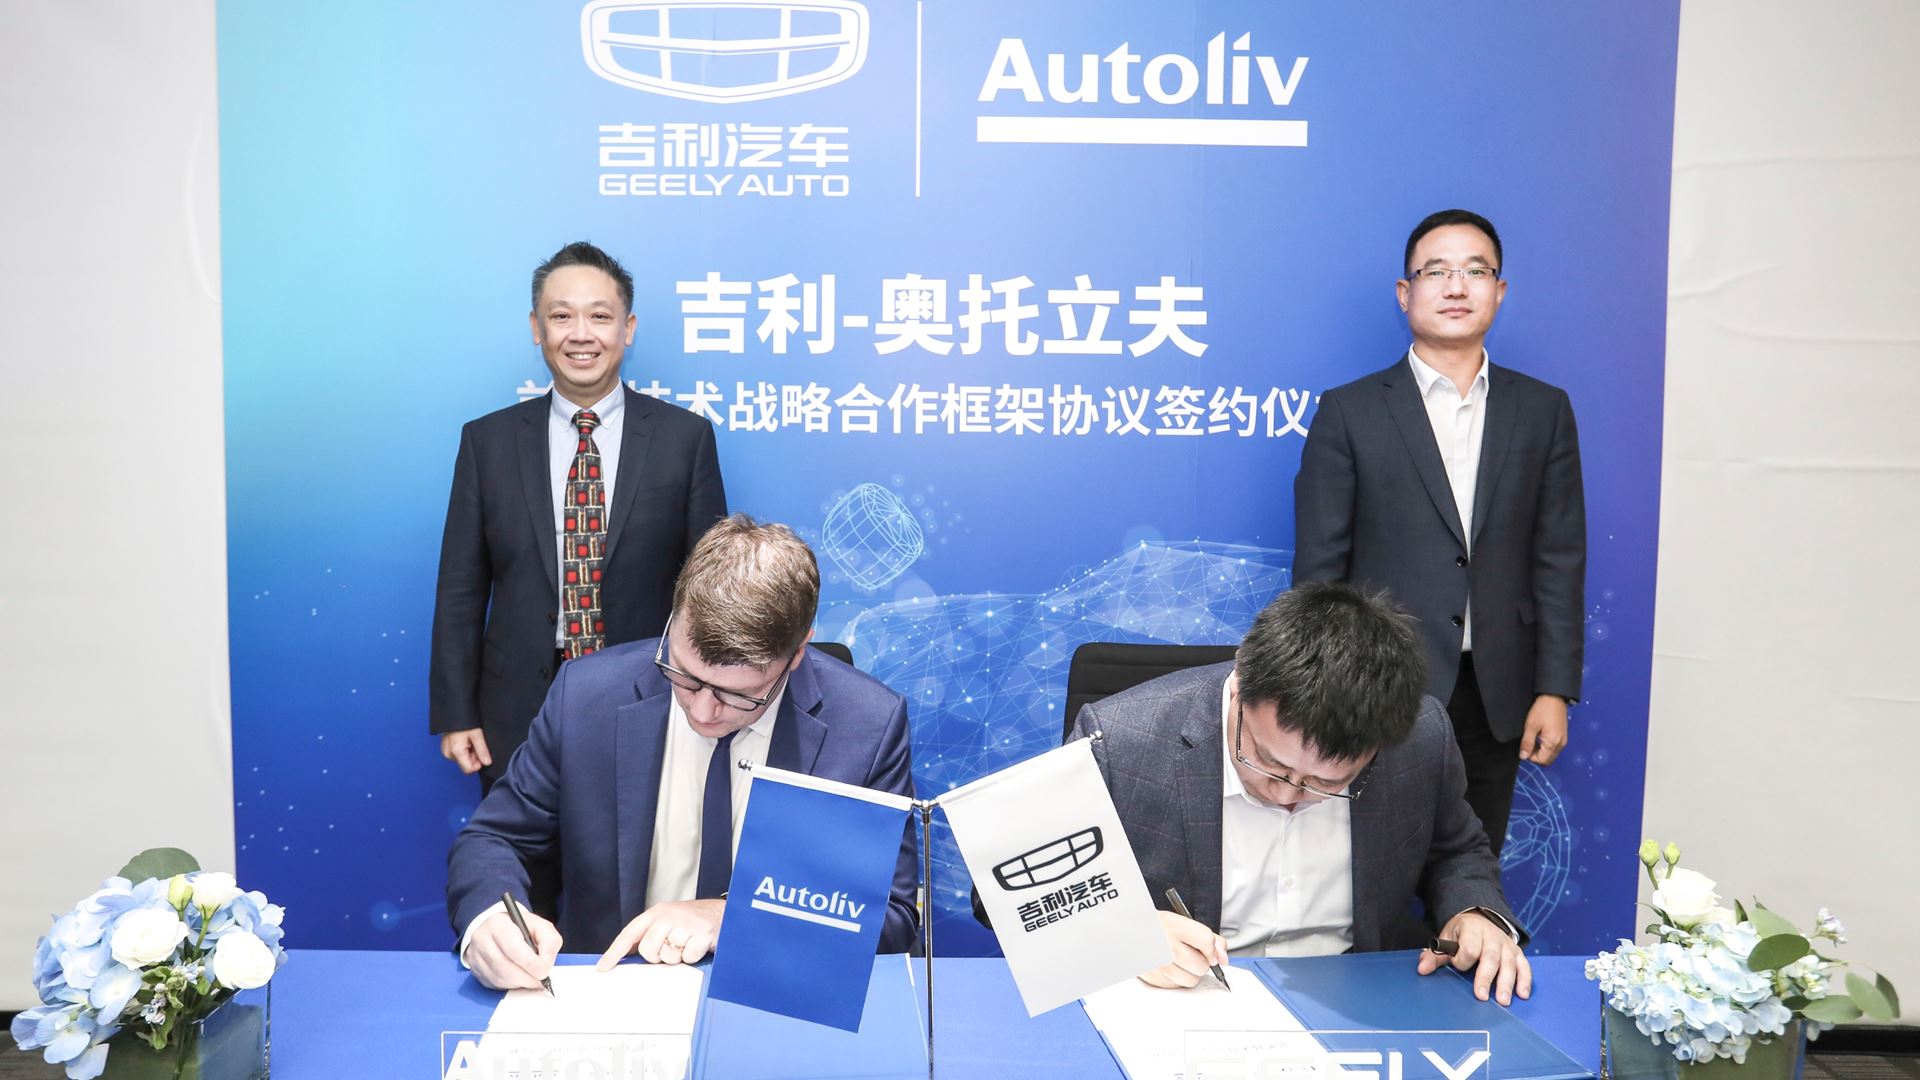 Autoliv China and Geely